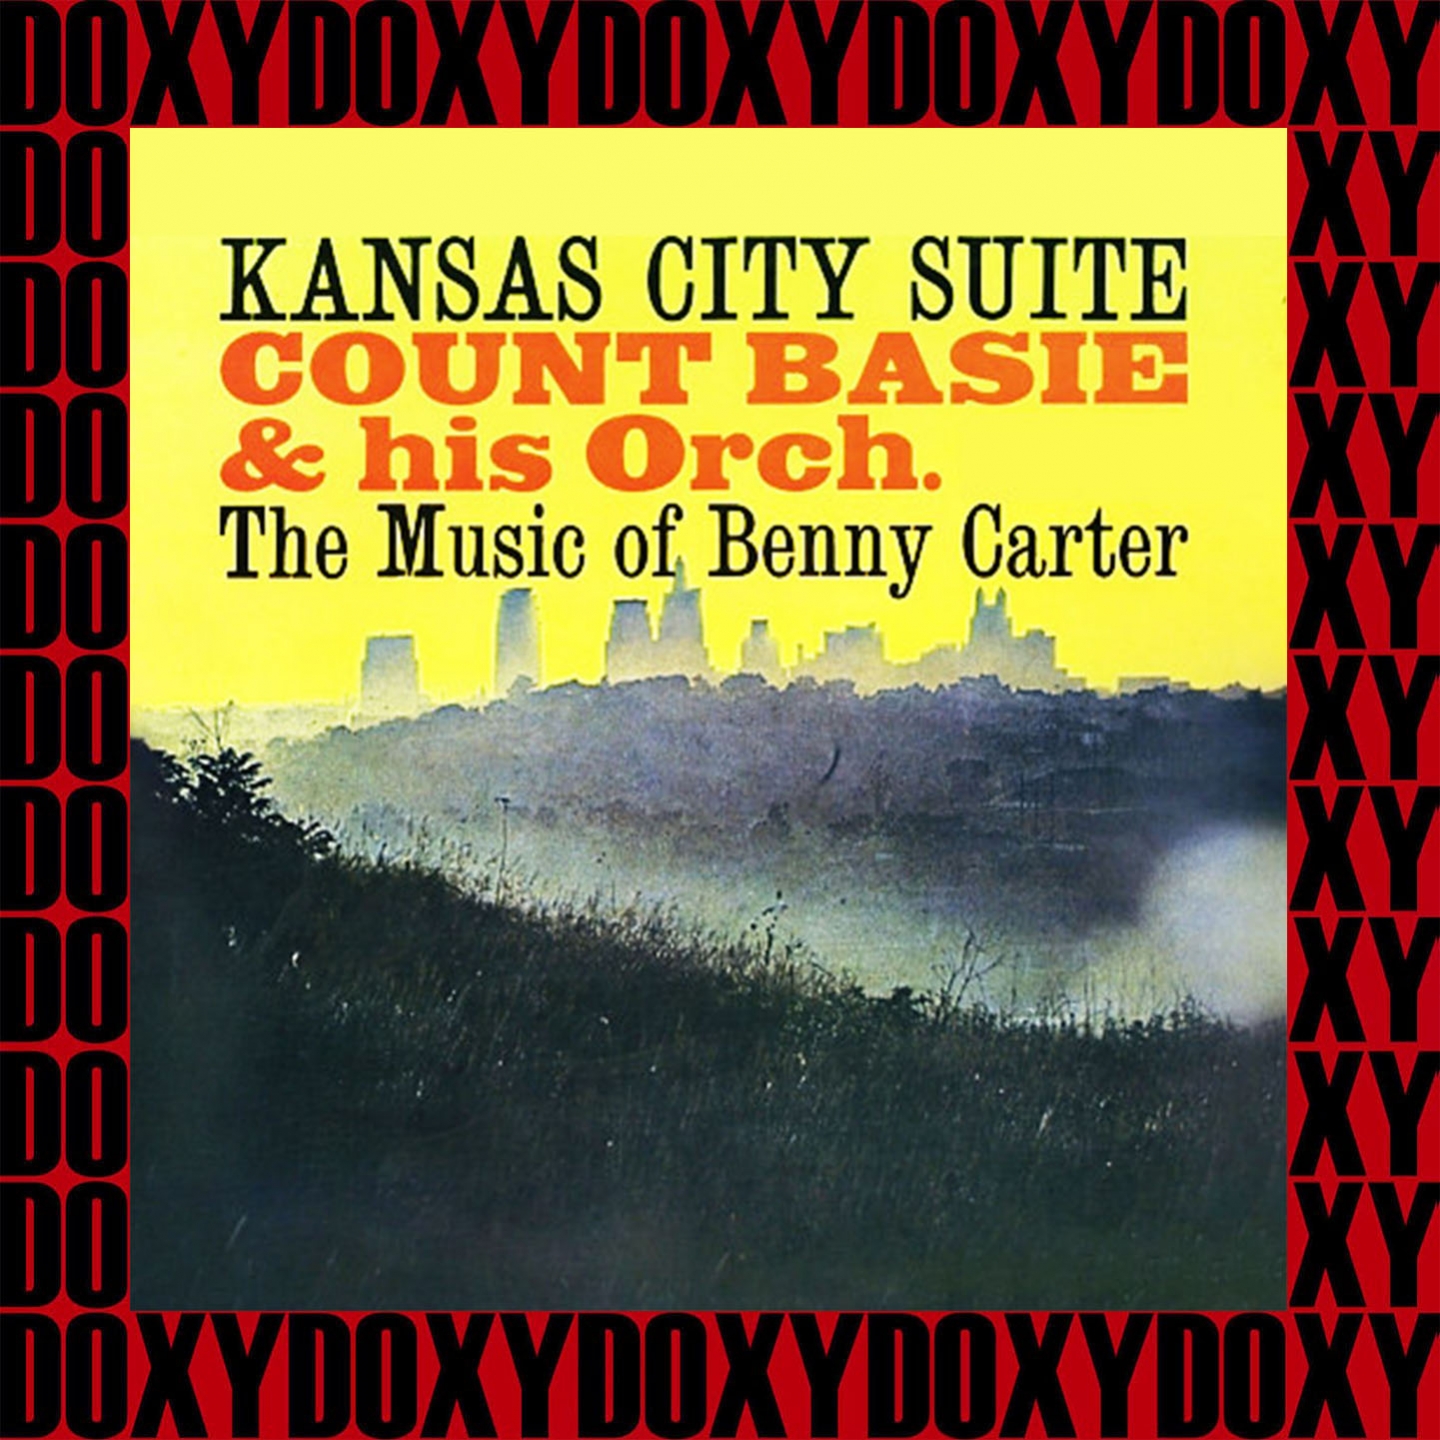 Kansas City Suite (Remastered Version) (Doxy Collection)